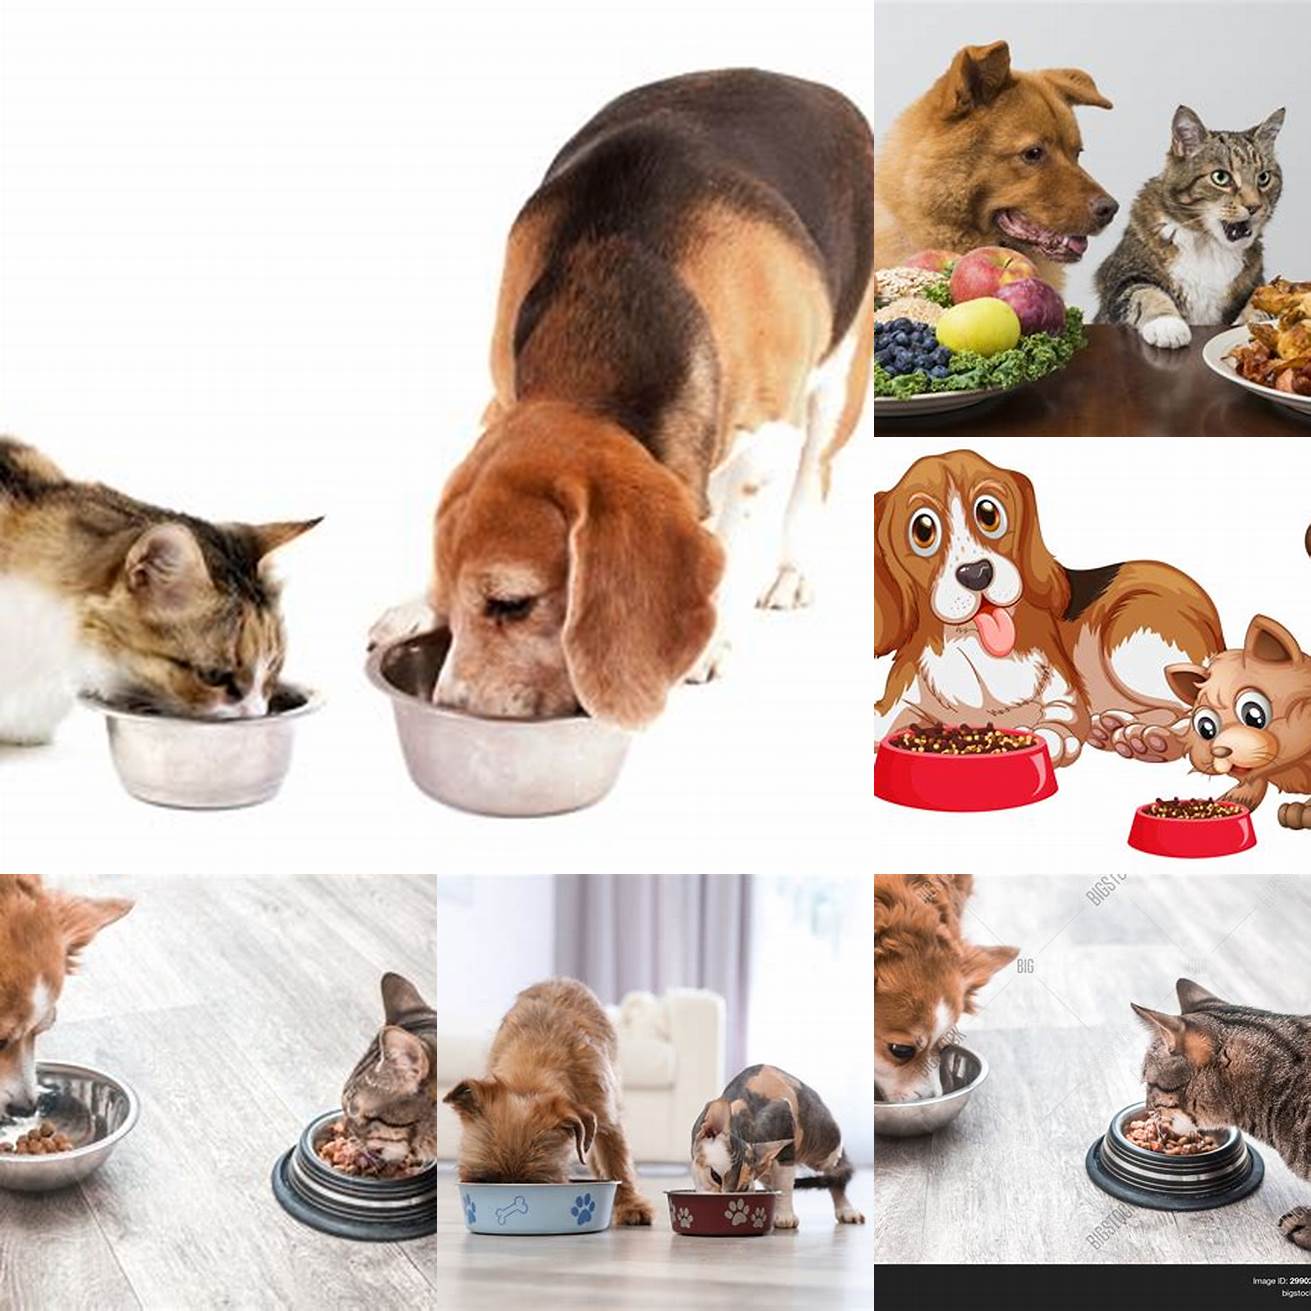 Image of a dog and cat eating together